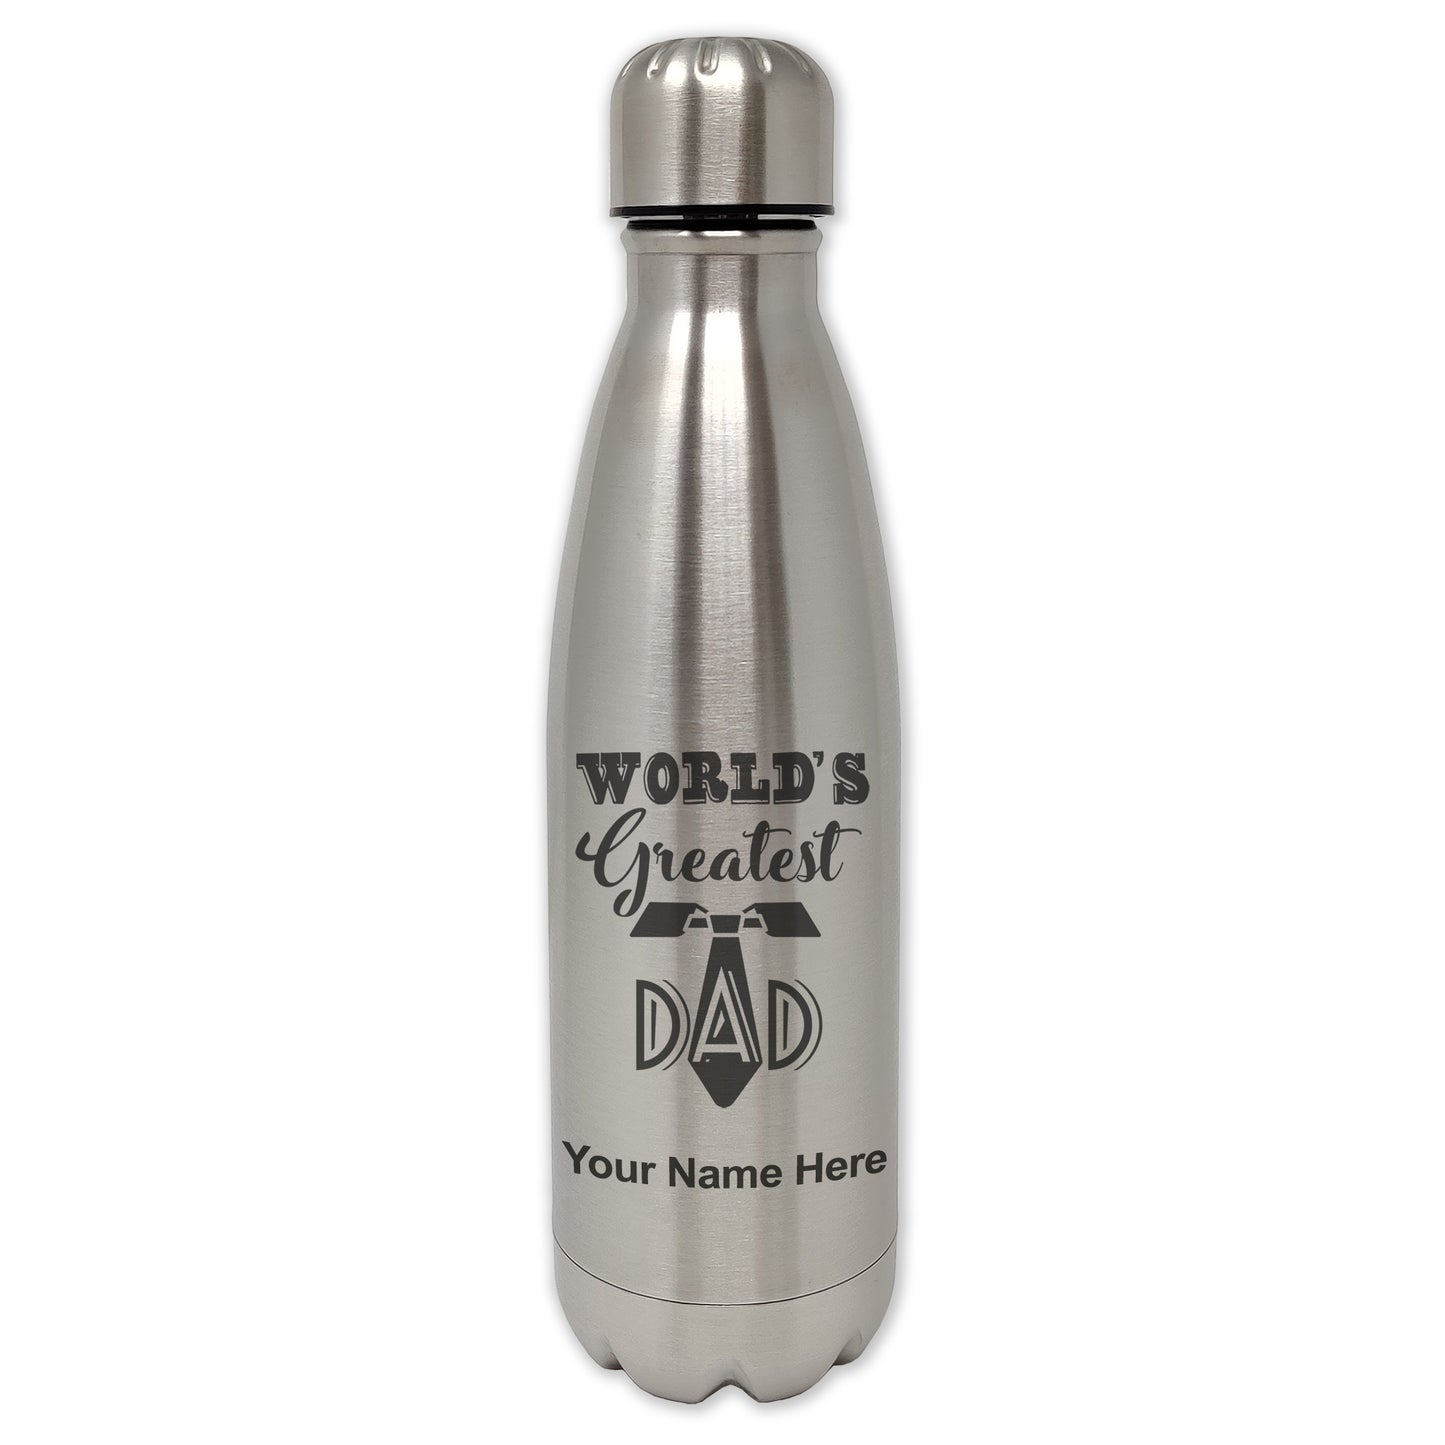 LaserGram Double Wall Water Bottle, World's Greatest Dad, Personalized Engraving Included